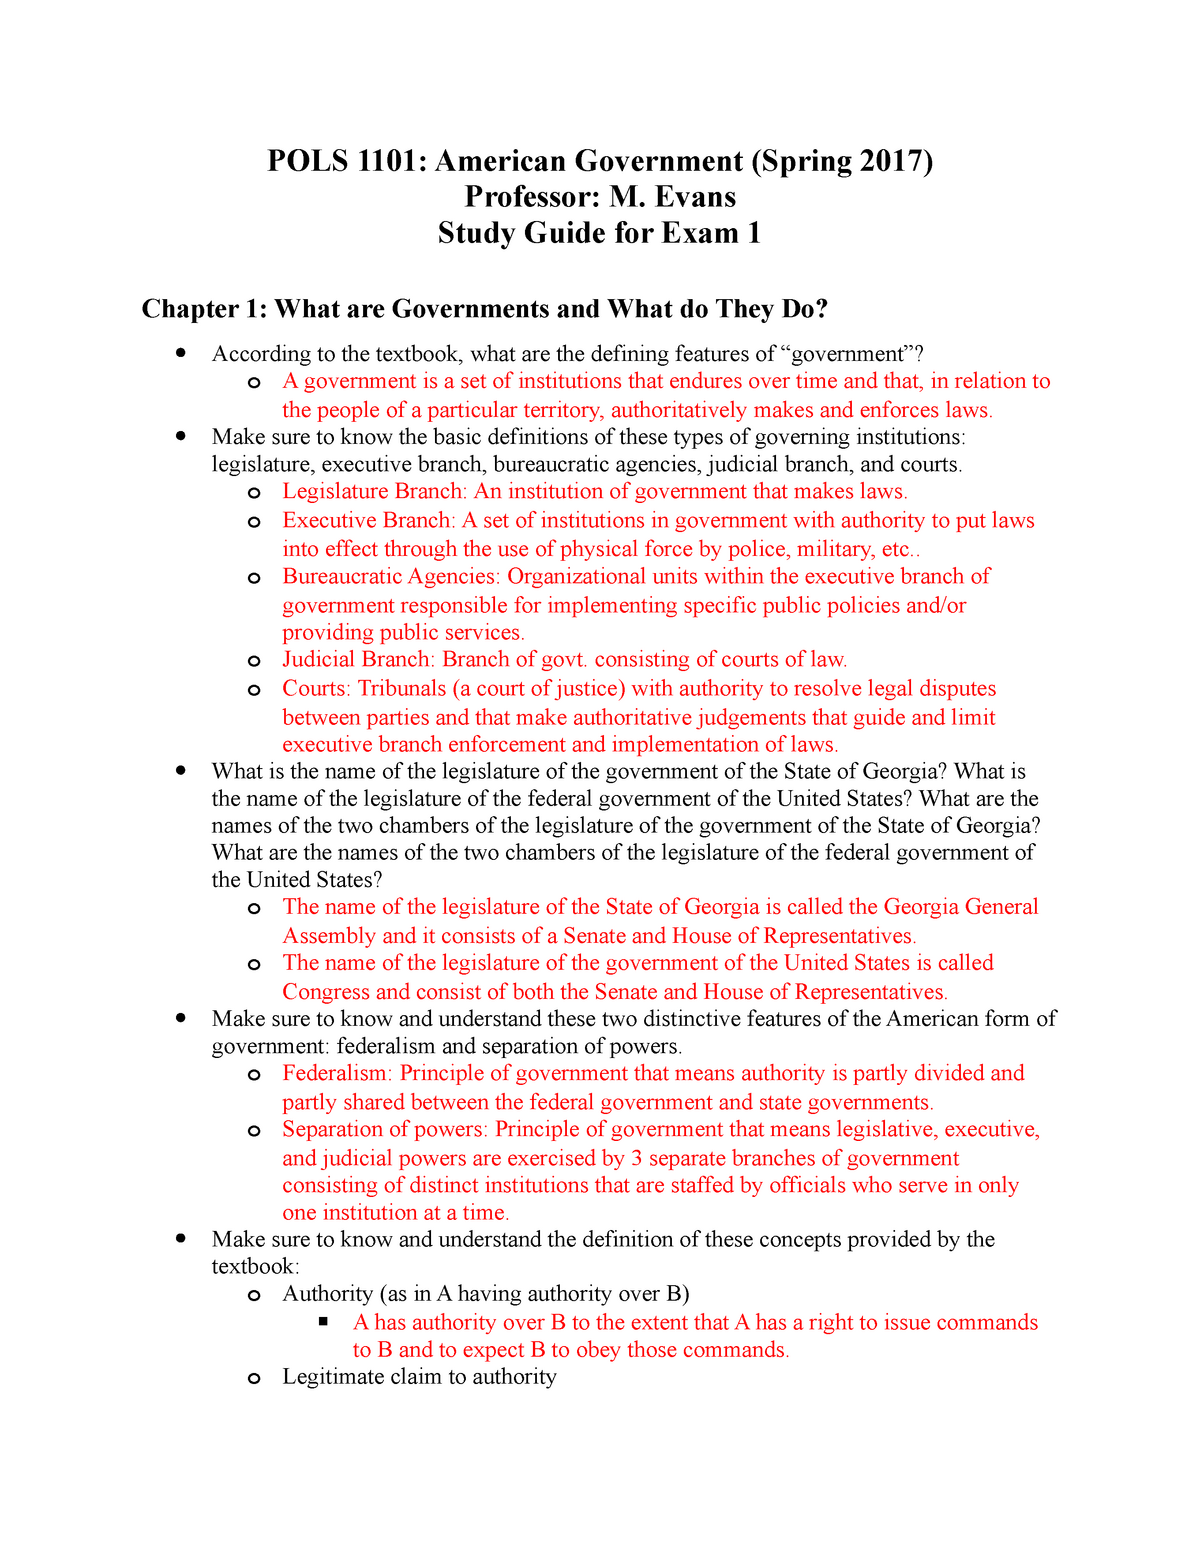 American Government Study Guide For Exam 1 By Professor Evans POLS